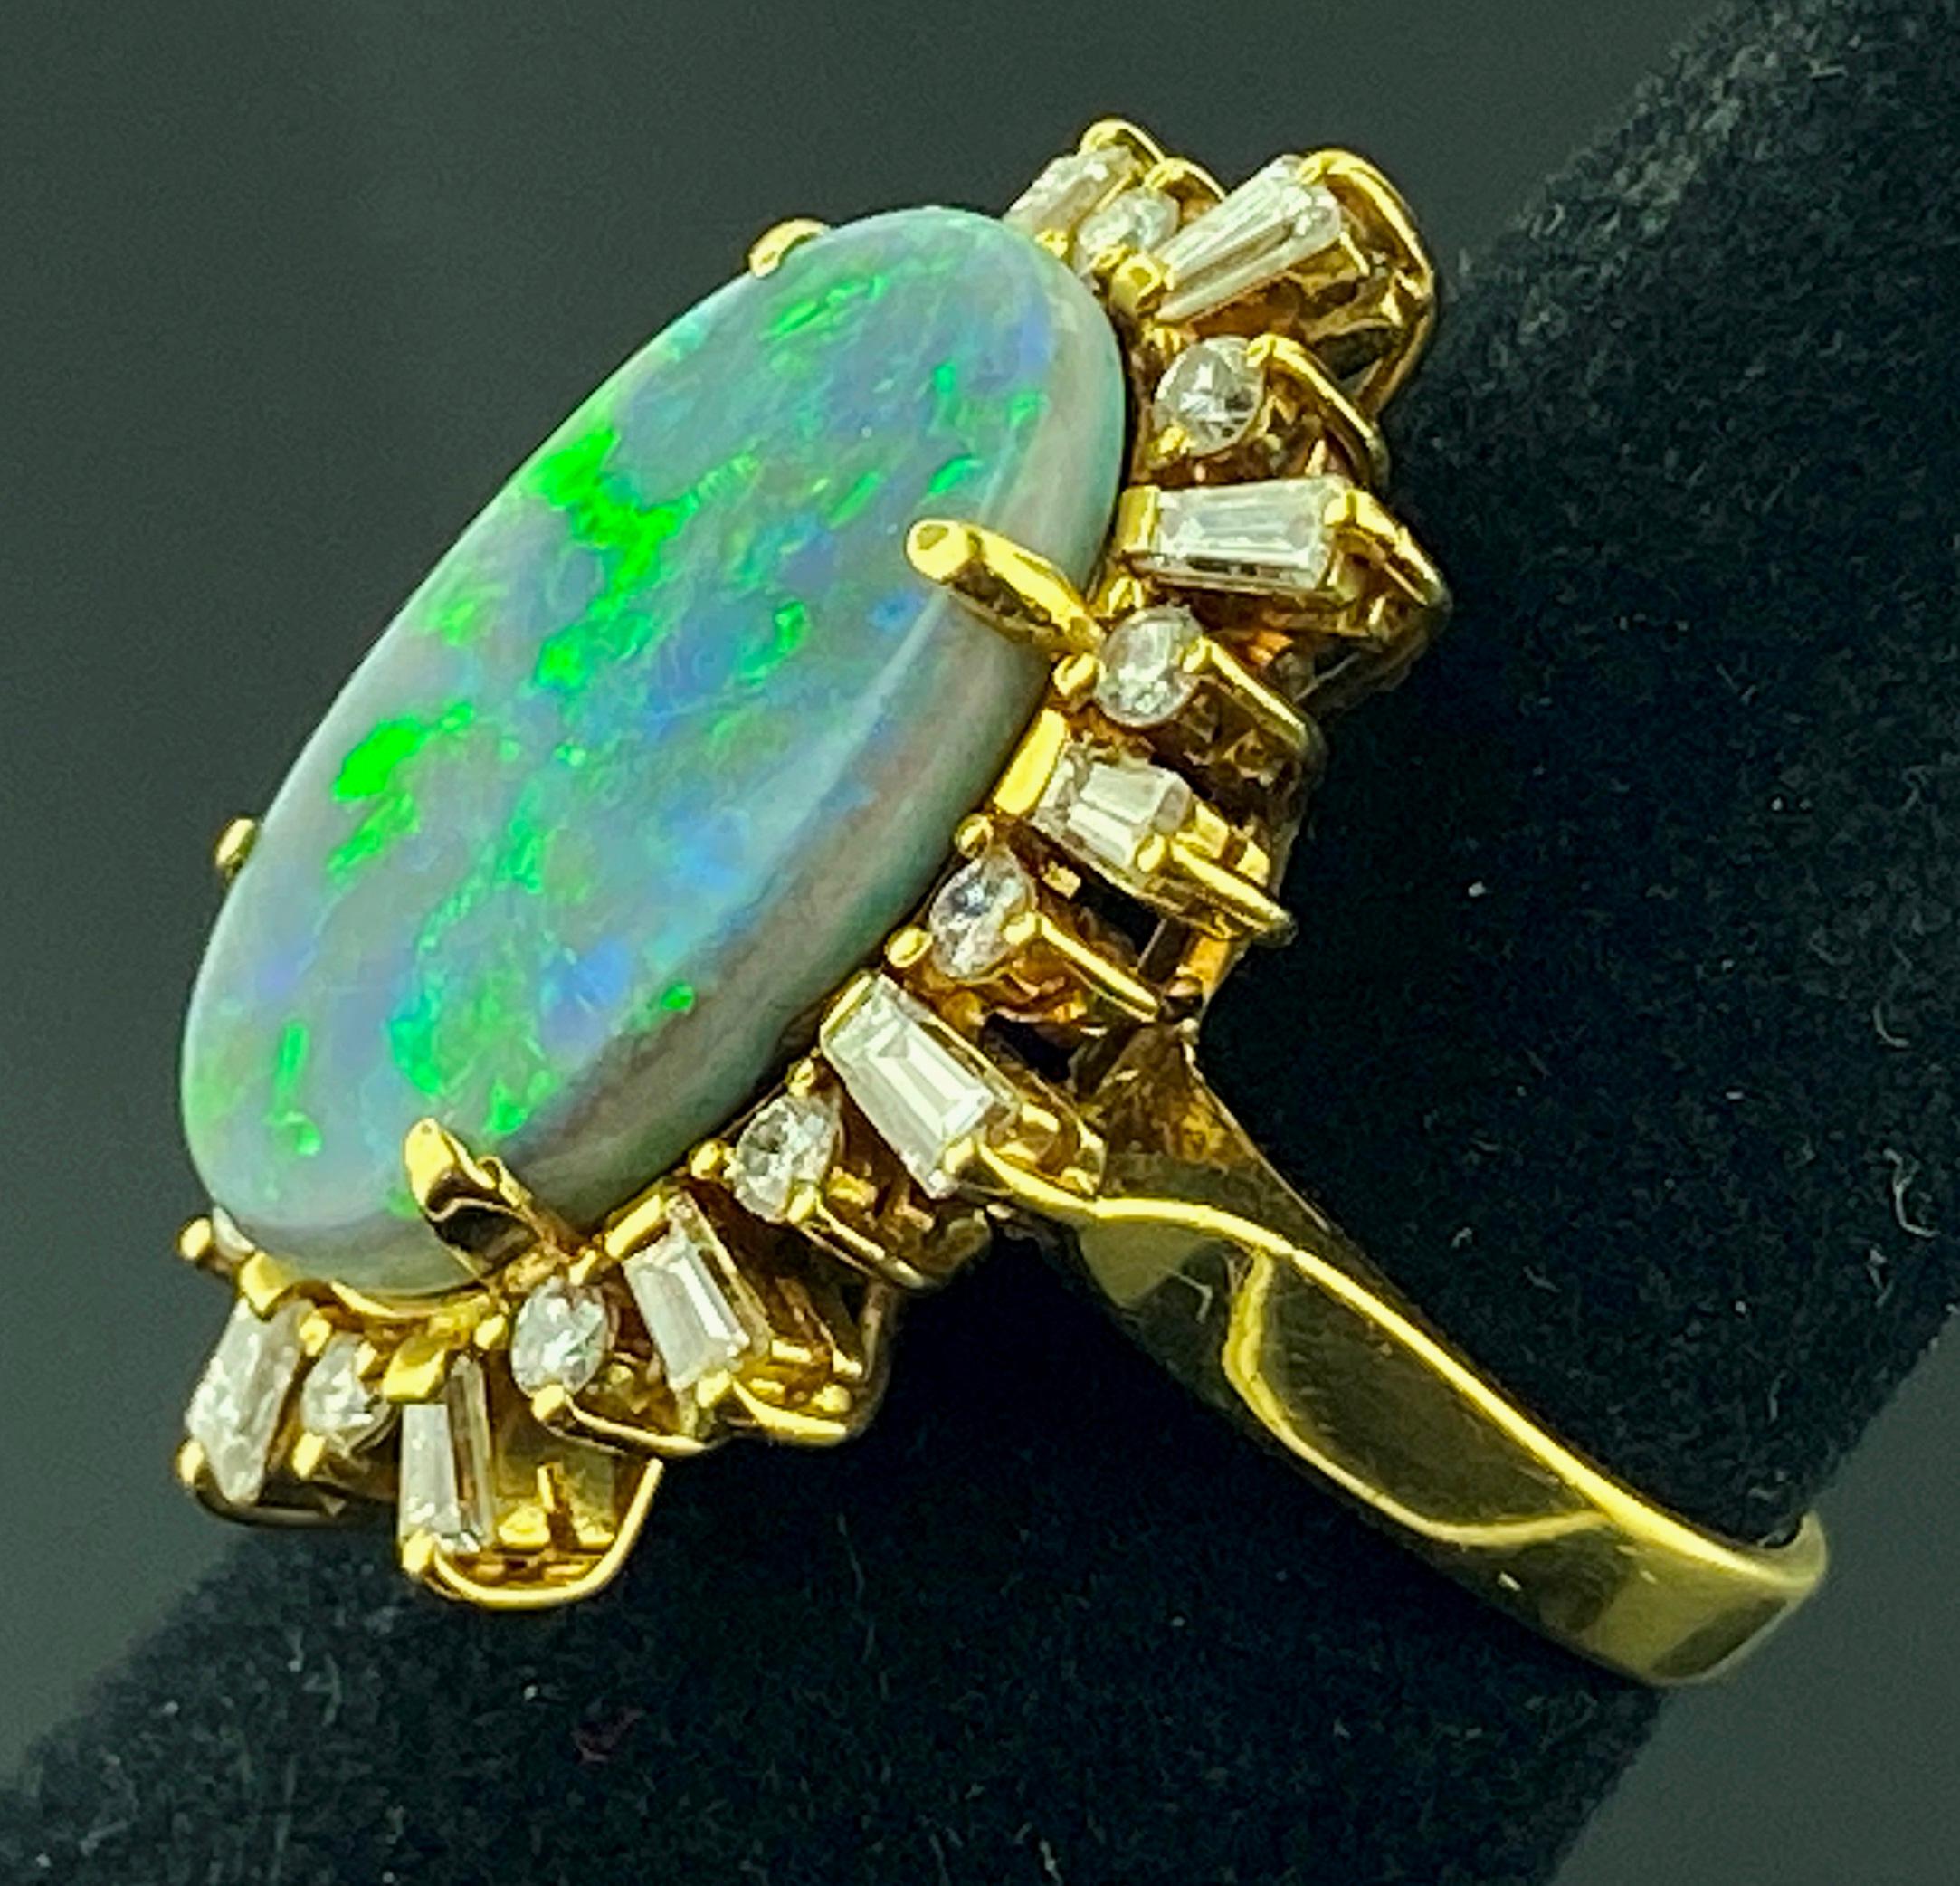 Set in 18 karat yellow gold is a Natural Boulder Opal, measuring 11.5 x 18.88 mm, surrounded with 12 tapered baguette cut diamonds for a weight of 0.50 carats, plus 12 round brilliant cut diamonds with a weight of 0.50 carats.  Total diamond weight